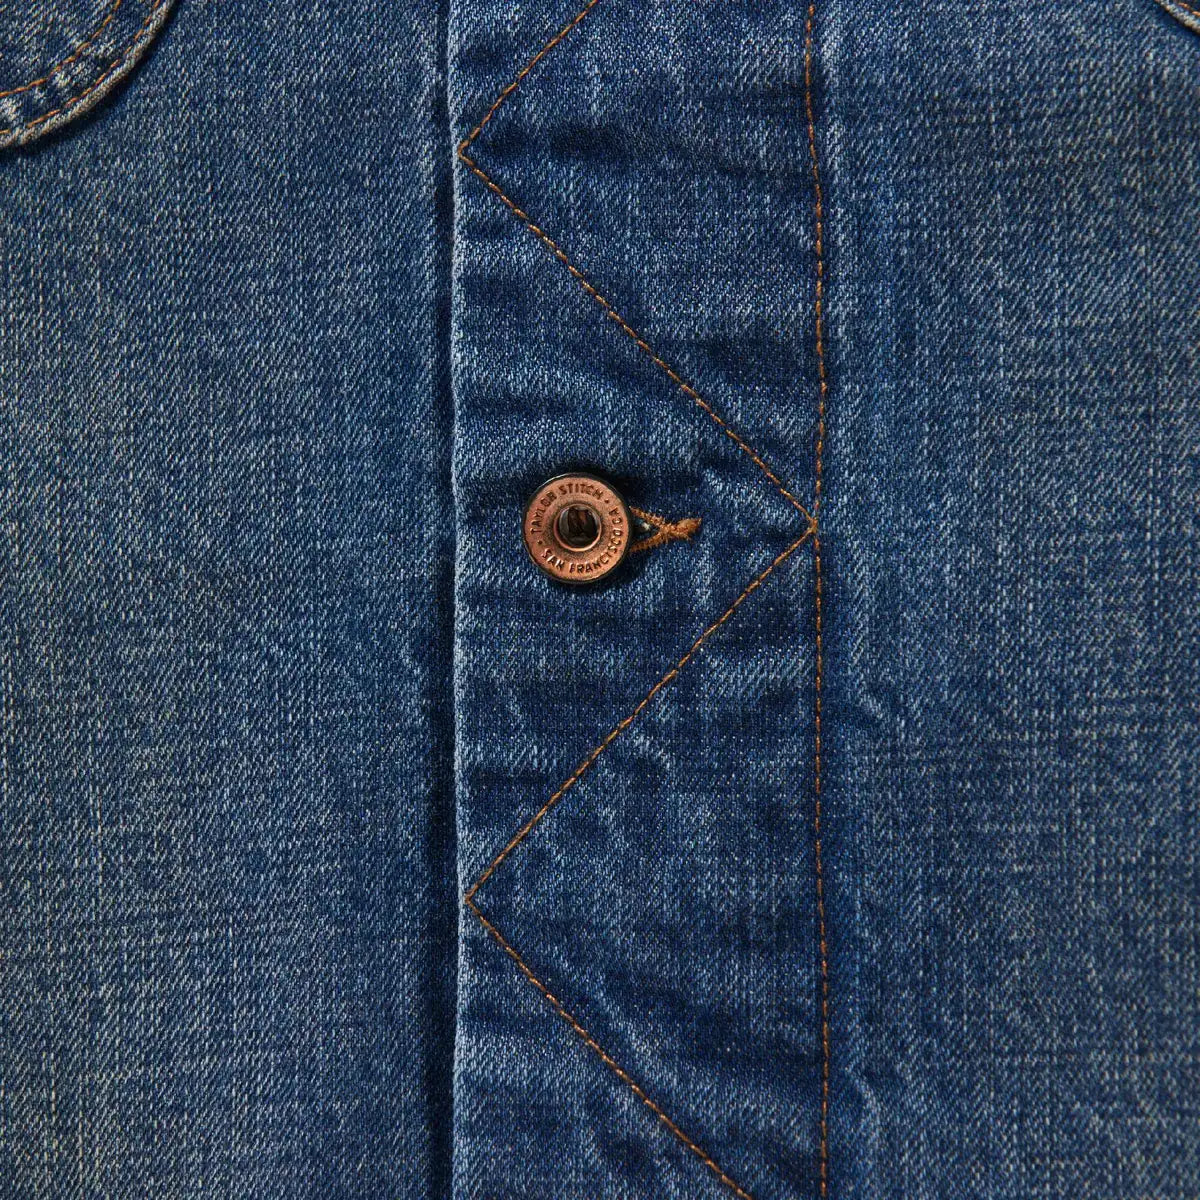 Taylor Stitch - TAYLOR STITCH THE LONG HAUL JACKET IN SAWYER WASH ORGANIC SELVAGE - Rent With Thred